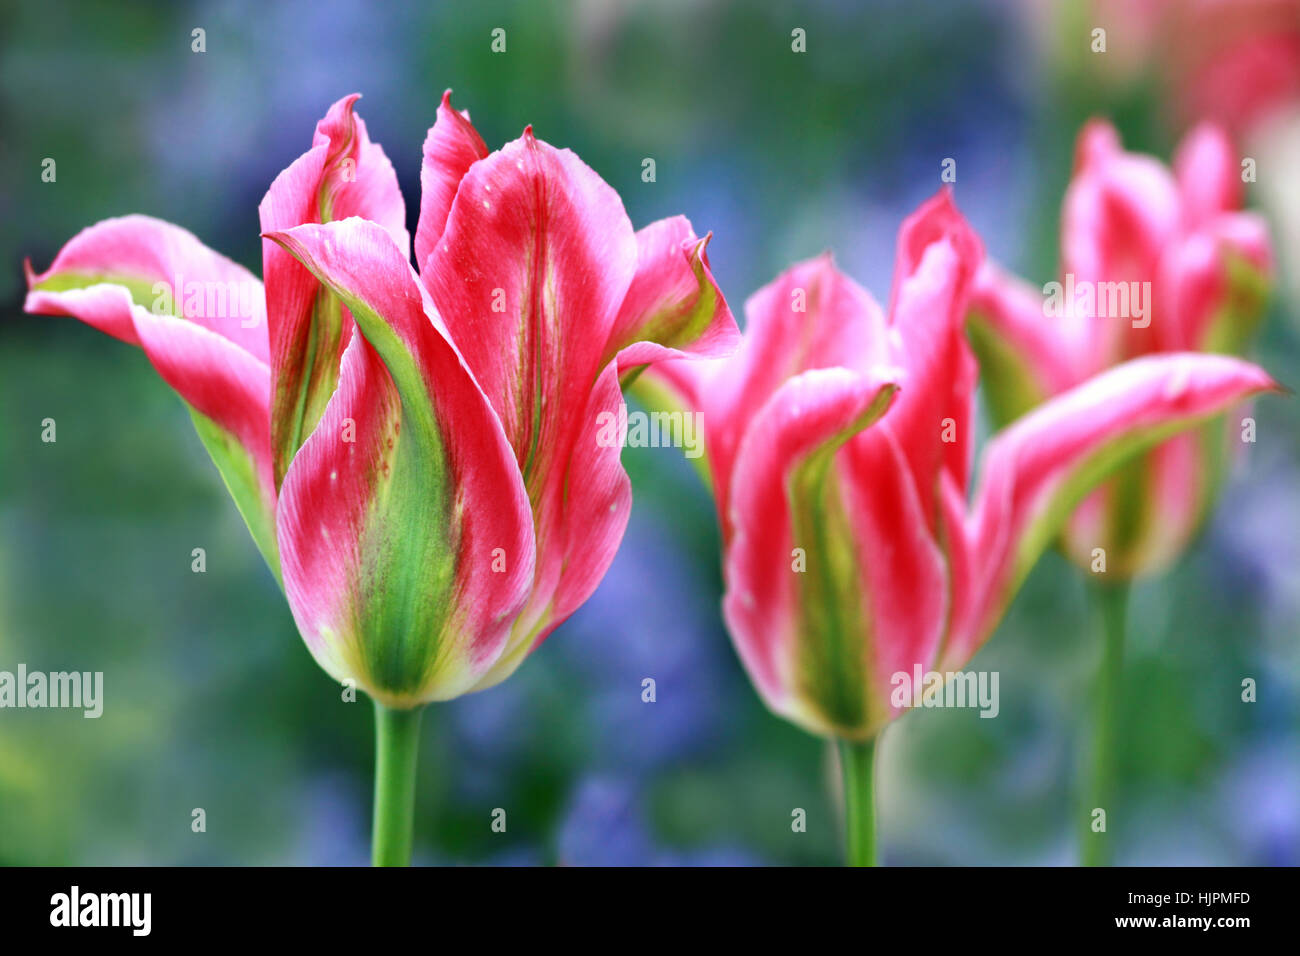 viridiflora tulips in pink and green Stock Photo